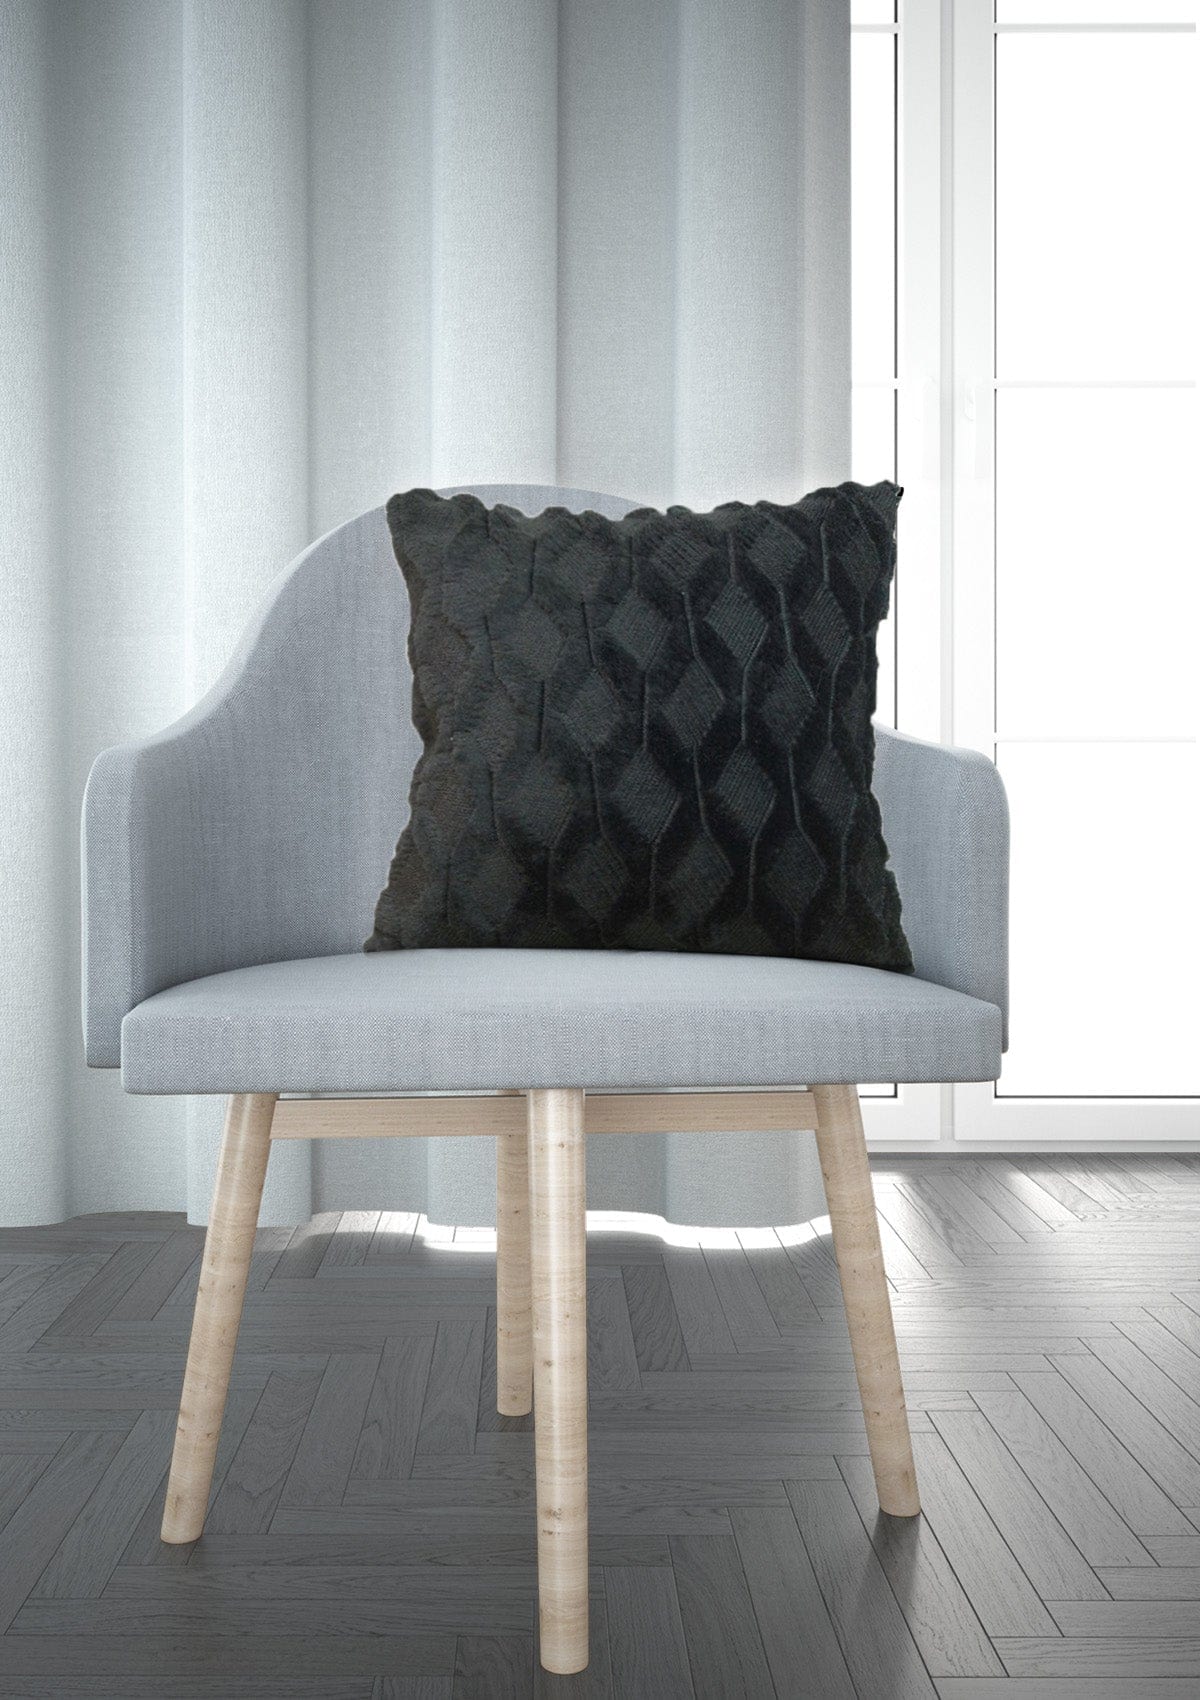 Elegant Black Fluffy Cushion Covers | CovermyCushion 30x50cm / Black / No thanks - cover only